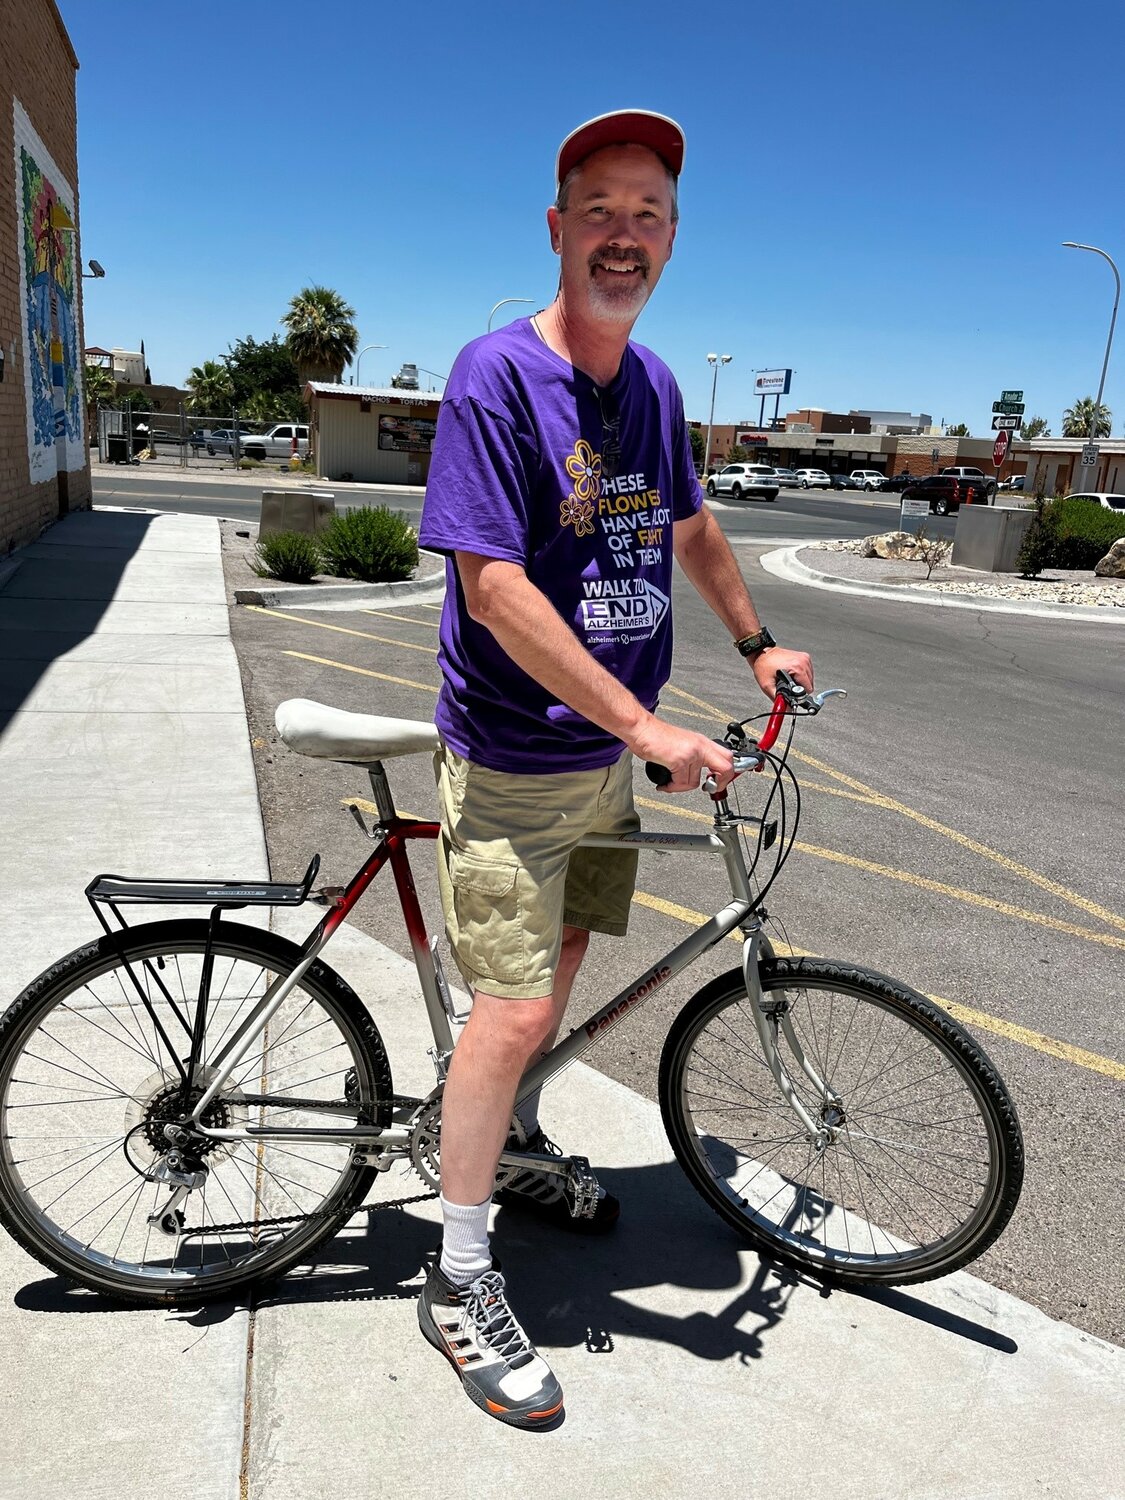 Bulletin editor and publisher Richard Coltharp on July 1, the day he donated his 36-year-old Panasonic Mountain Cat mountain bike to the Hub in Las Cruces. In early October, the bicycle resurfaced, having found a new owner in town.